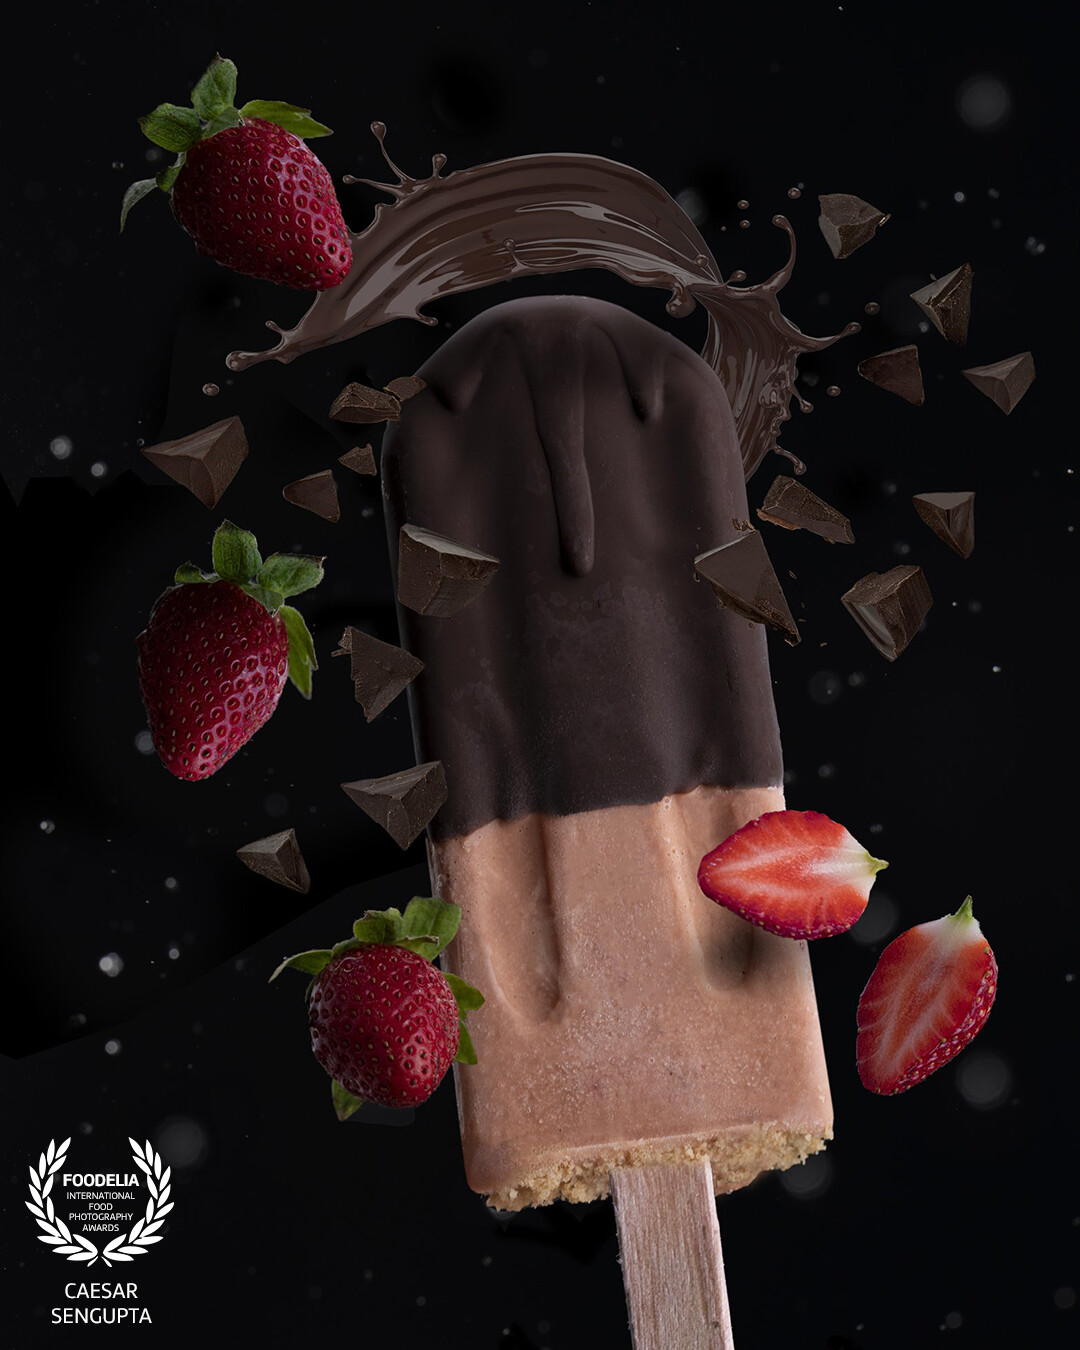 A dark and moody levitation image. The strawberries and the popsicle are shot differently and then merged to make a composite image.